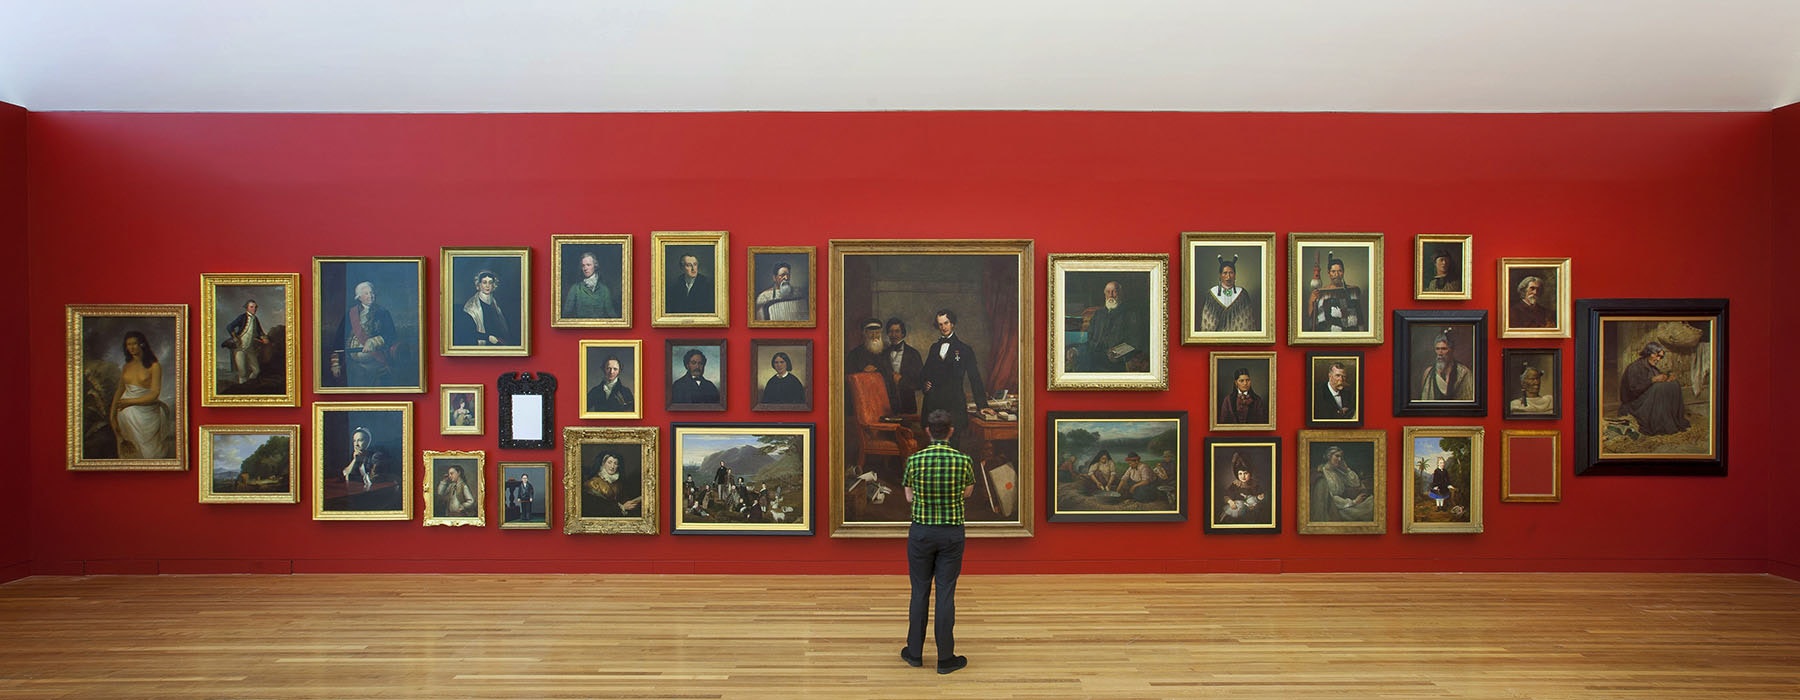 Man standing in front of a wall of portraits